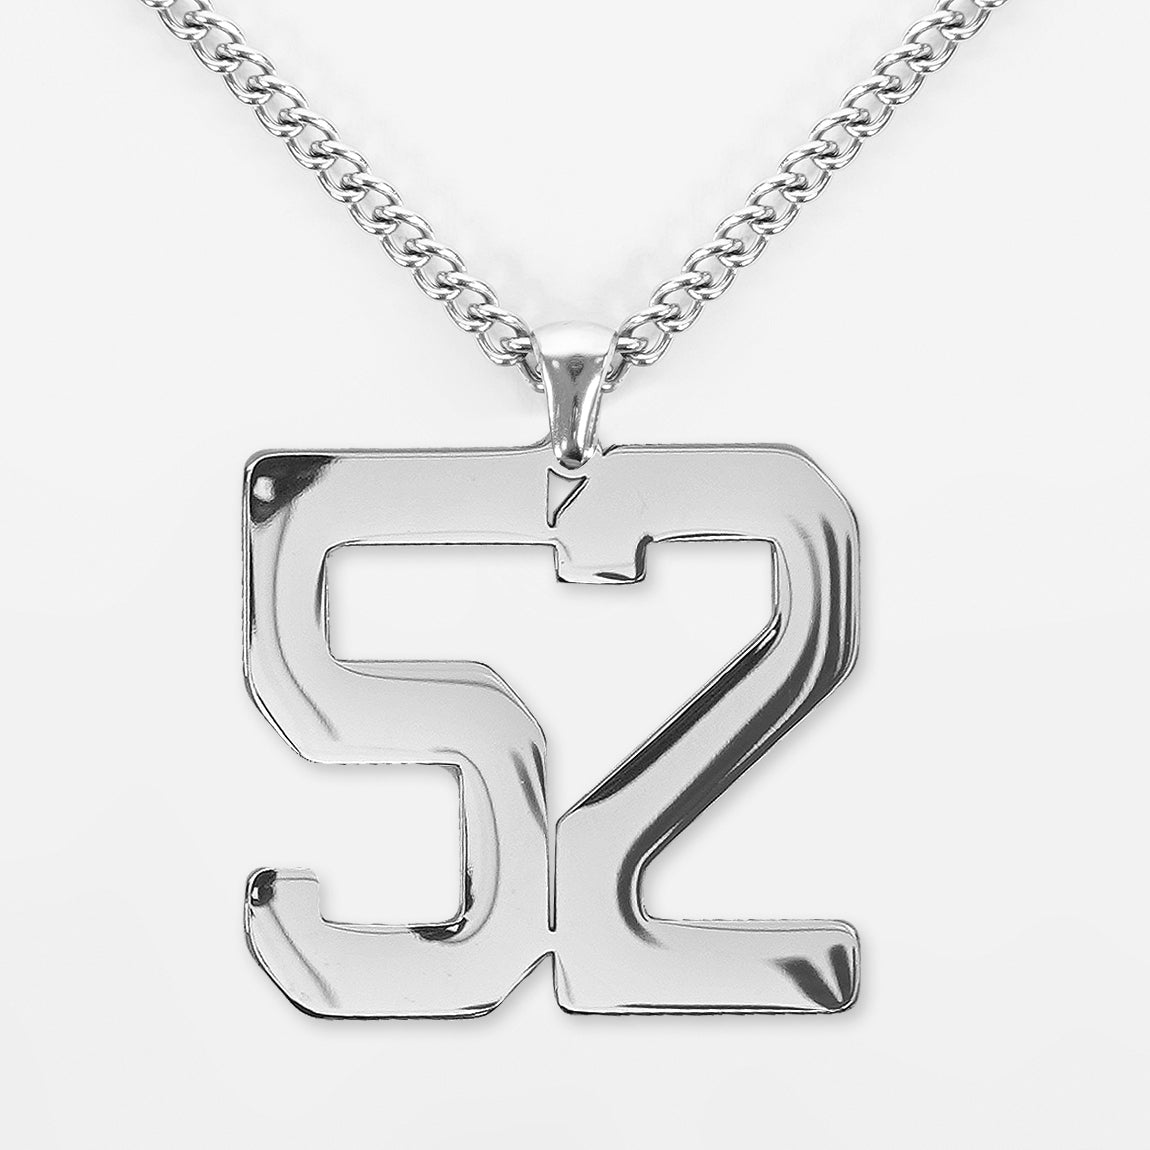 52 Number Pendant with Chain Necklace - Stainless Steel